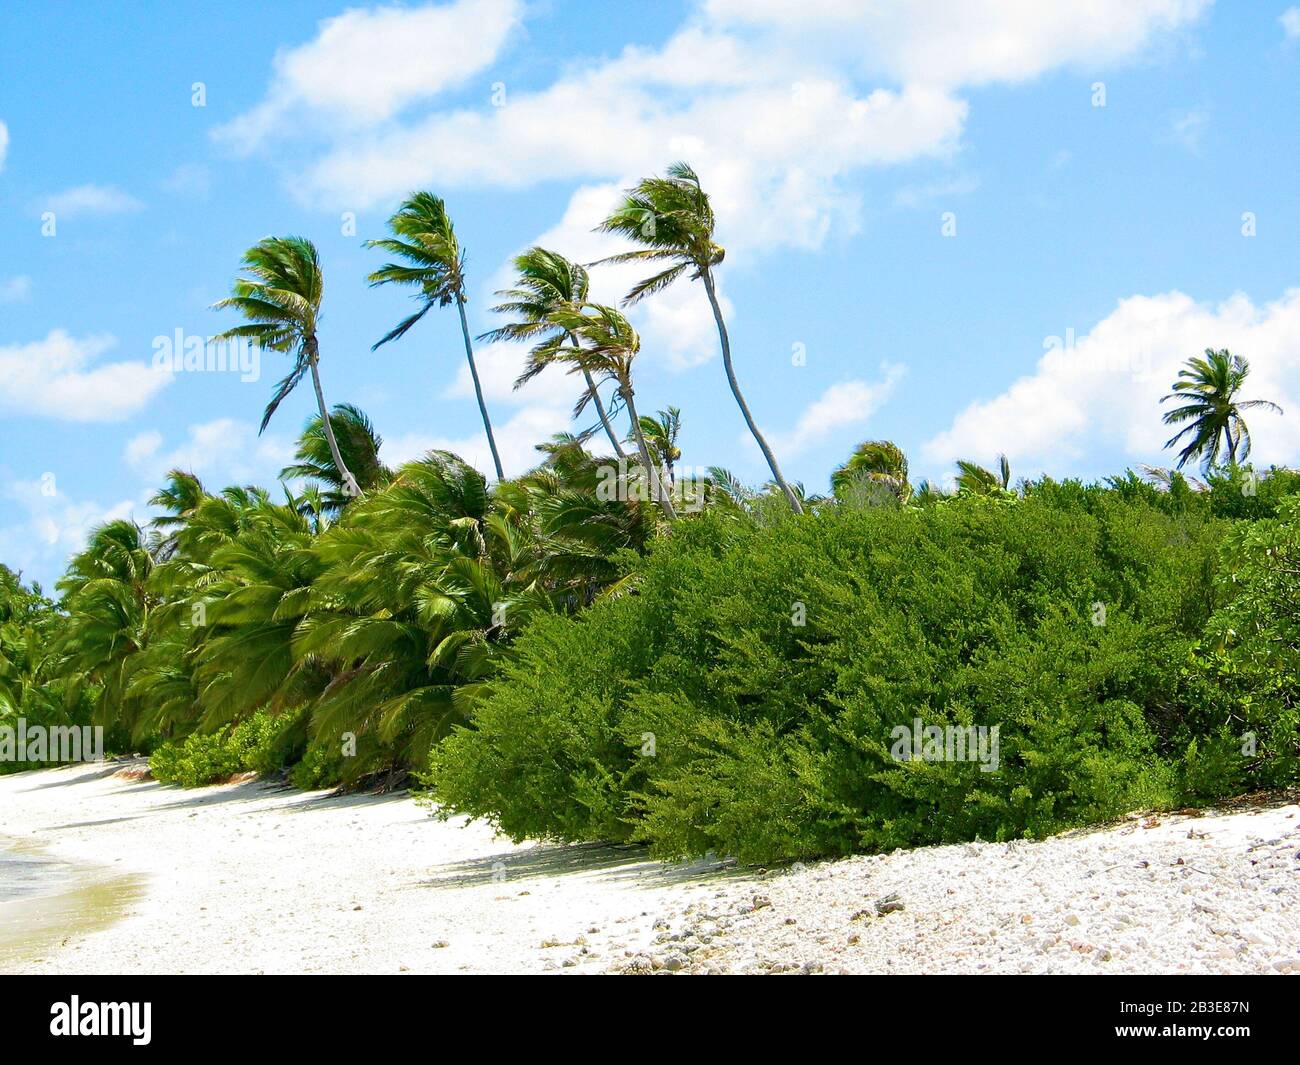 Coconut palms and tropical scrub on the beach at Cocos Keeling Islands. Stock Photo